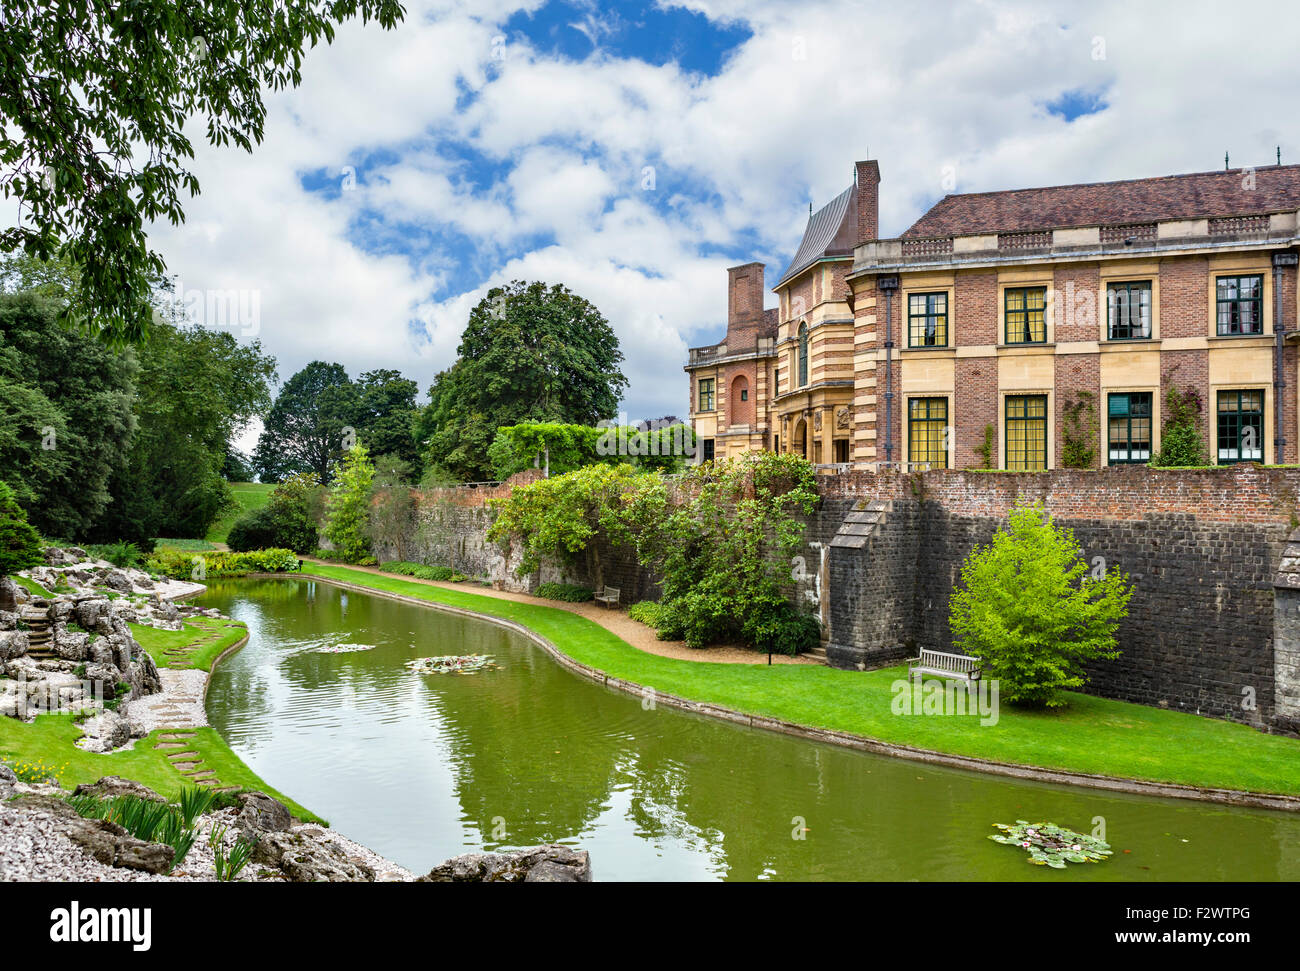 Eltham Palace, the former home of Stephen and Virginia Courtauld, viewed from the garden, Eltham, London, England, UK Stock Photo